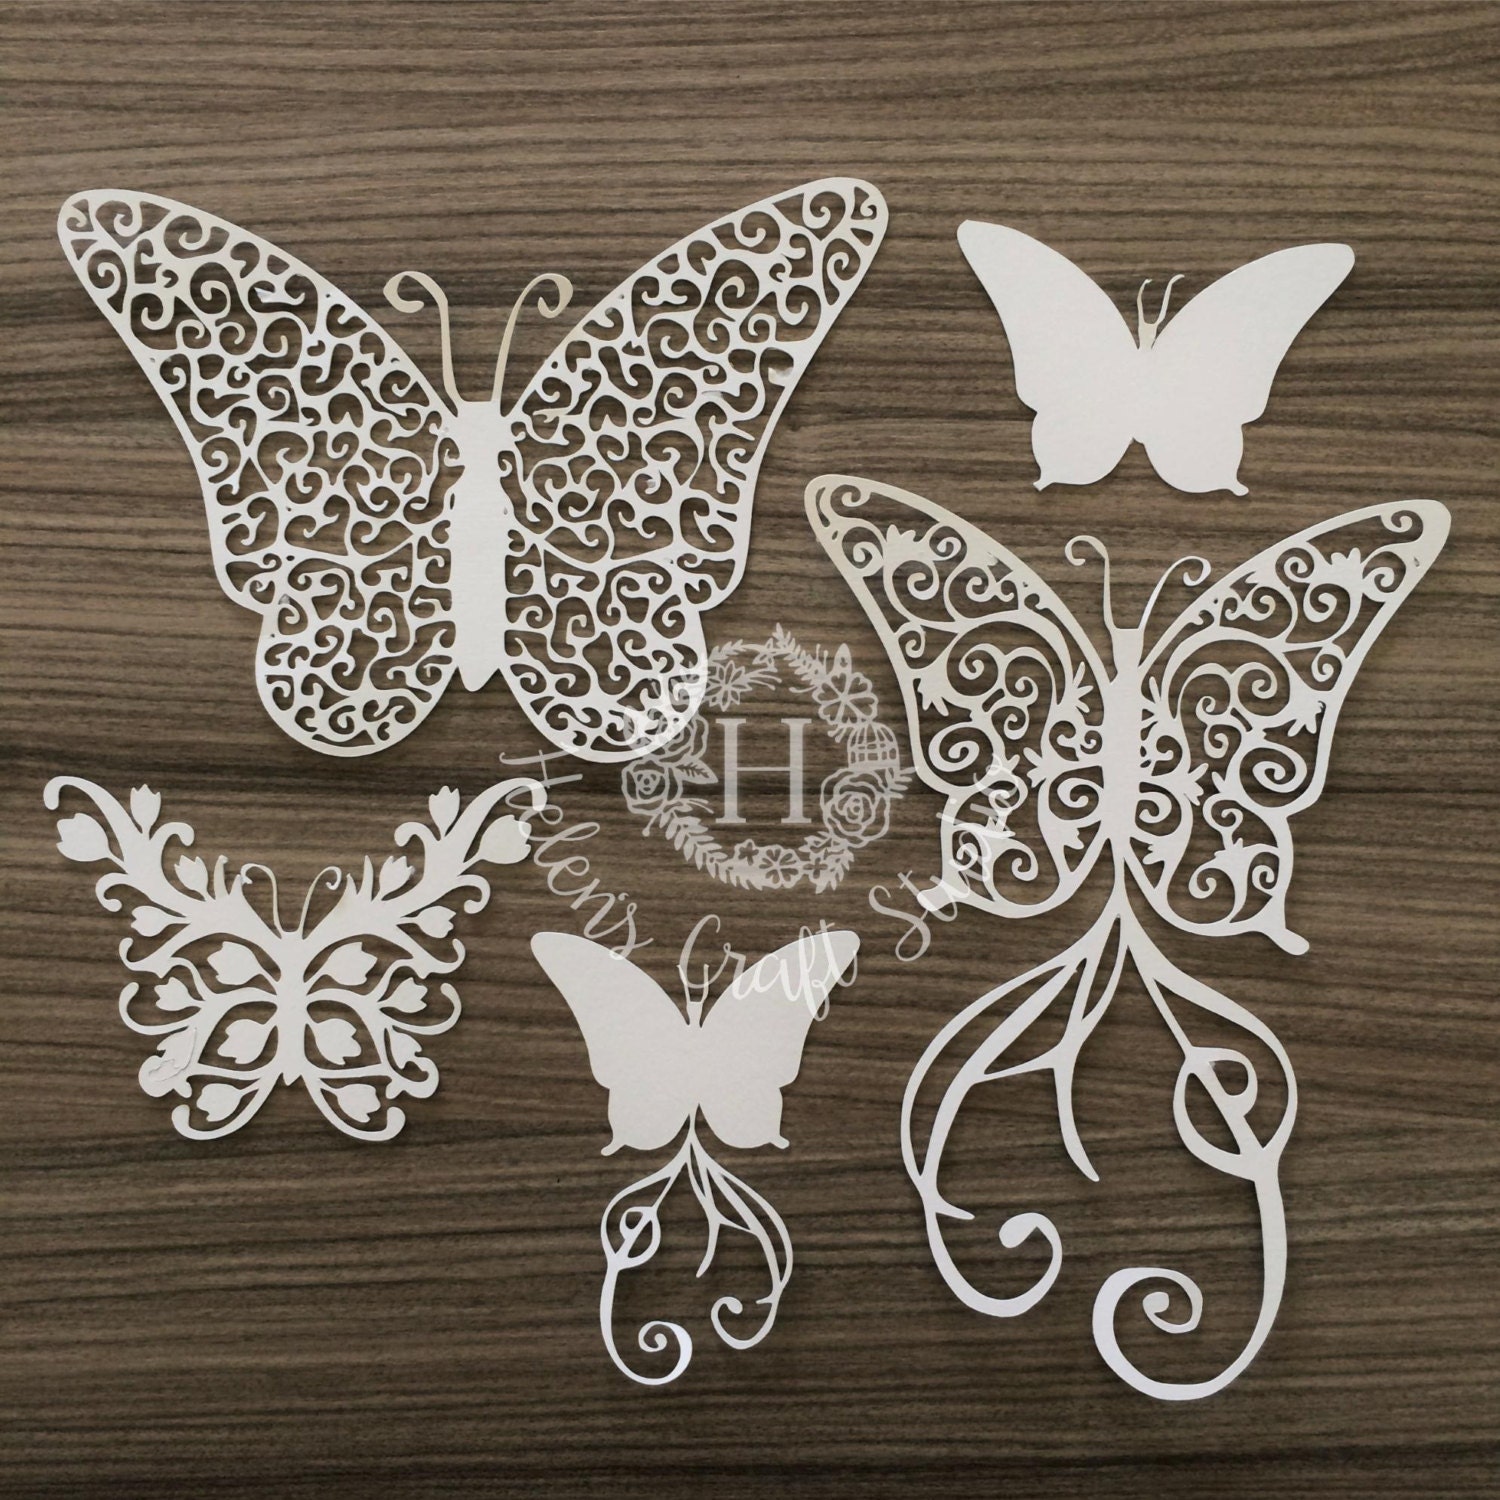 Butterflies SVG cutting file and butterfly DXF cut file